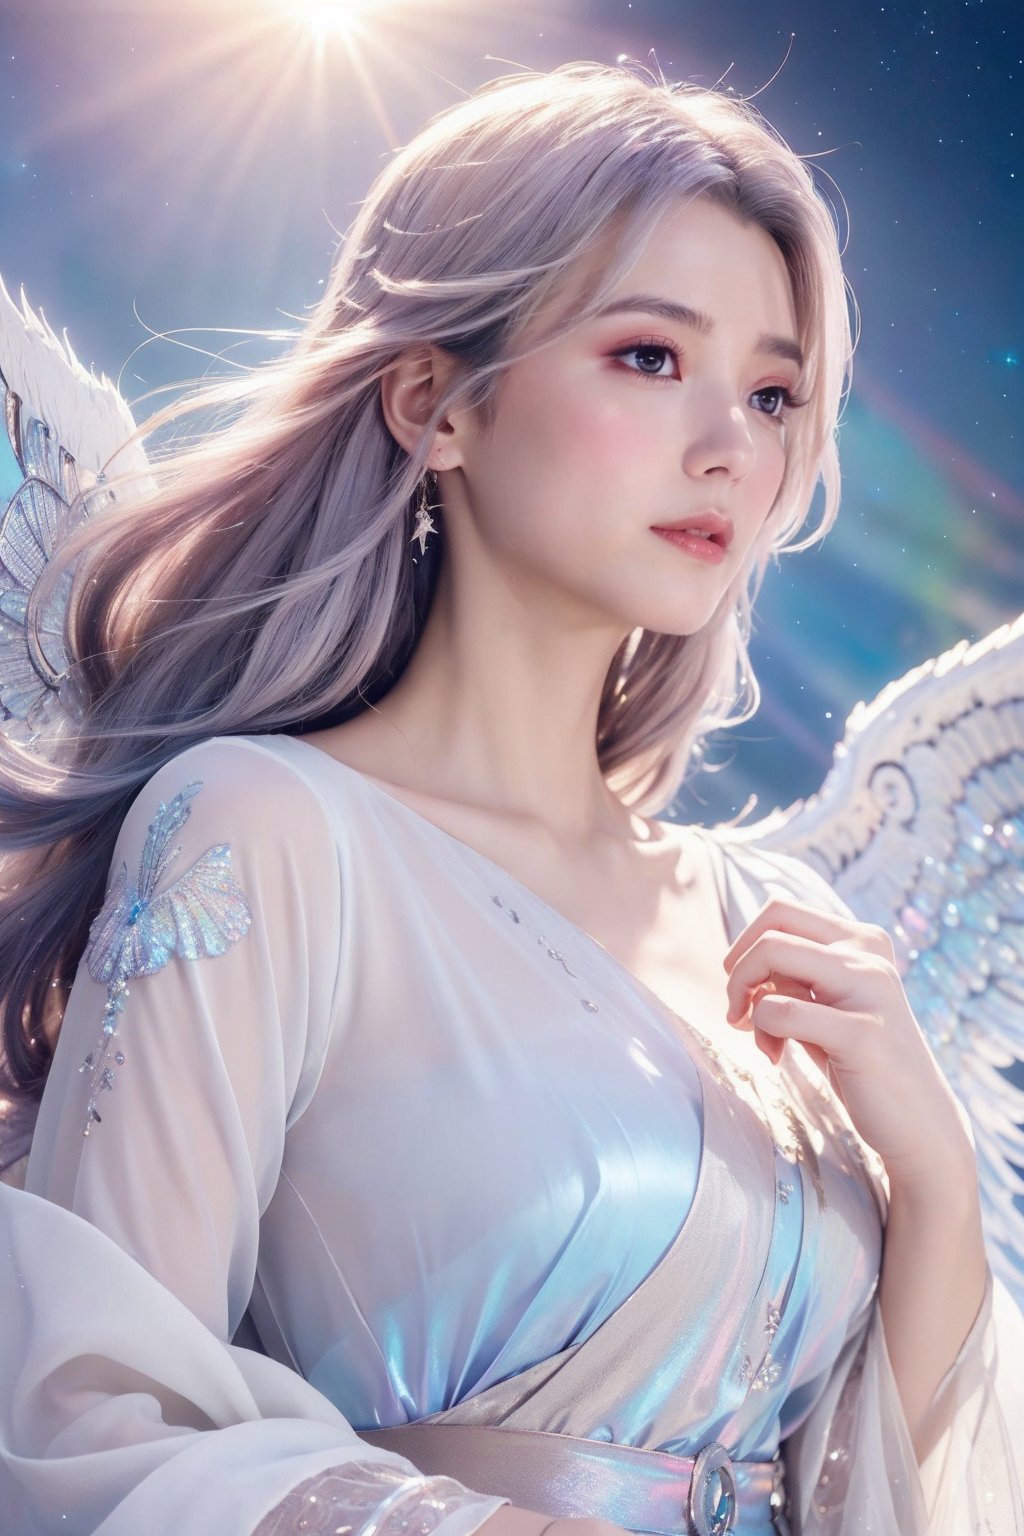 (masterpiece, best quality, CGI, official art:1.2), (stunning celestial being:1.3), (iridescent wings:1.4), shimmering silver hair, piercing sapphire eyes, gentle smile, (luminous aura:1.2), soft focus, whimsical atmosphere, serene emotion, dreamy tone, vibrant intensity, inspired by Hayao Miyazaki's style, ethereal aesthetic, pastel colors with (soft pink accents:1.1), warm mood, soft golden lighting, diagonal shot, looking up in wonder, surrounded by (delicate clouds:1.1) and (shimmering stardust:1.2), focal point on the being's face, intricate textures on wings and clothes, highly realistic fabric texture, atmospheric mist effect, high image complexity, detailed environment, subtle movement of wings, dynamic energy.,Xyunxiao